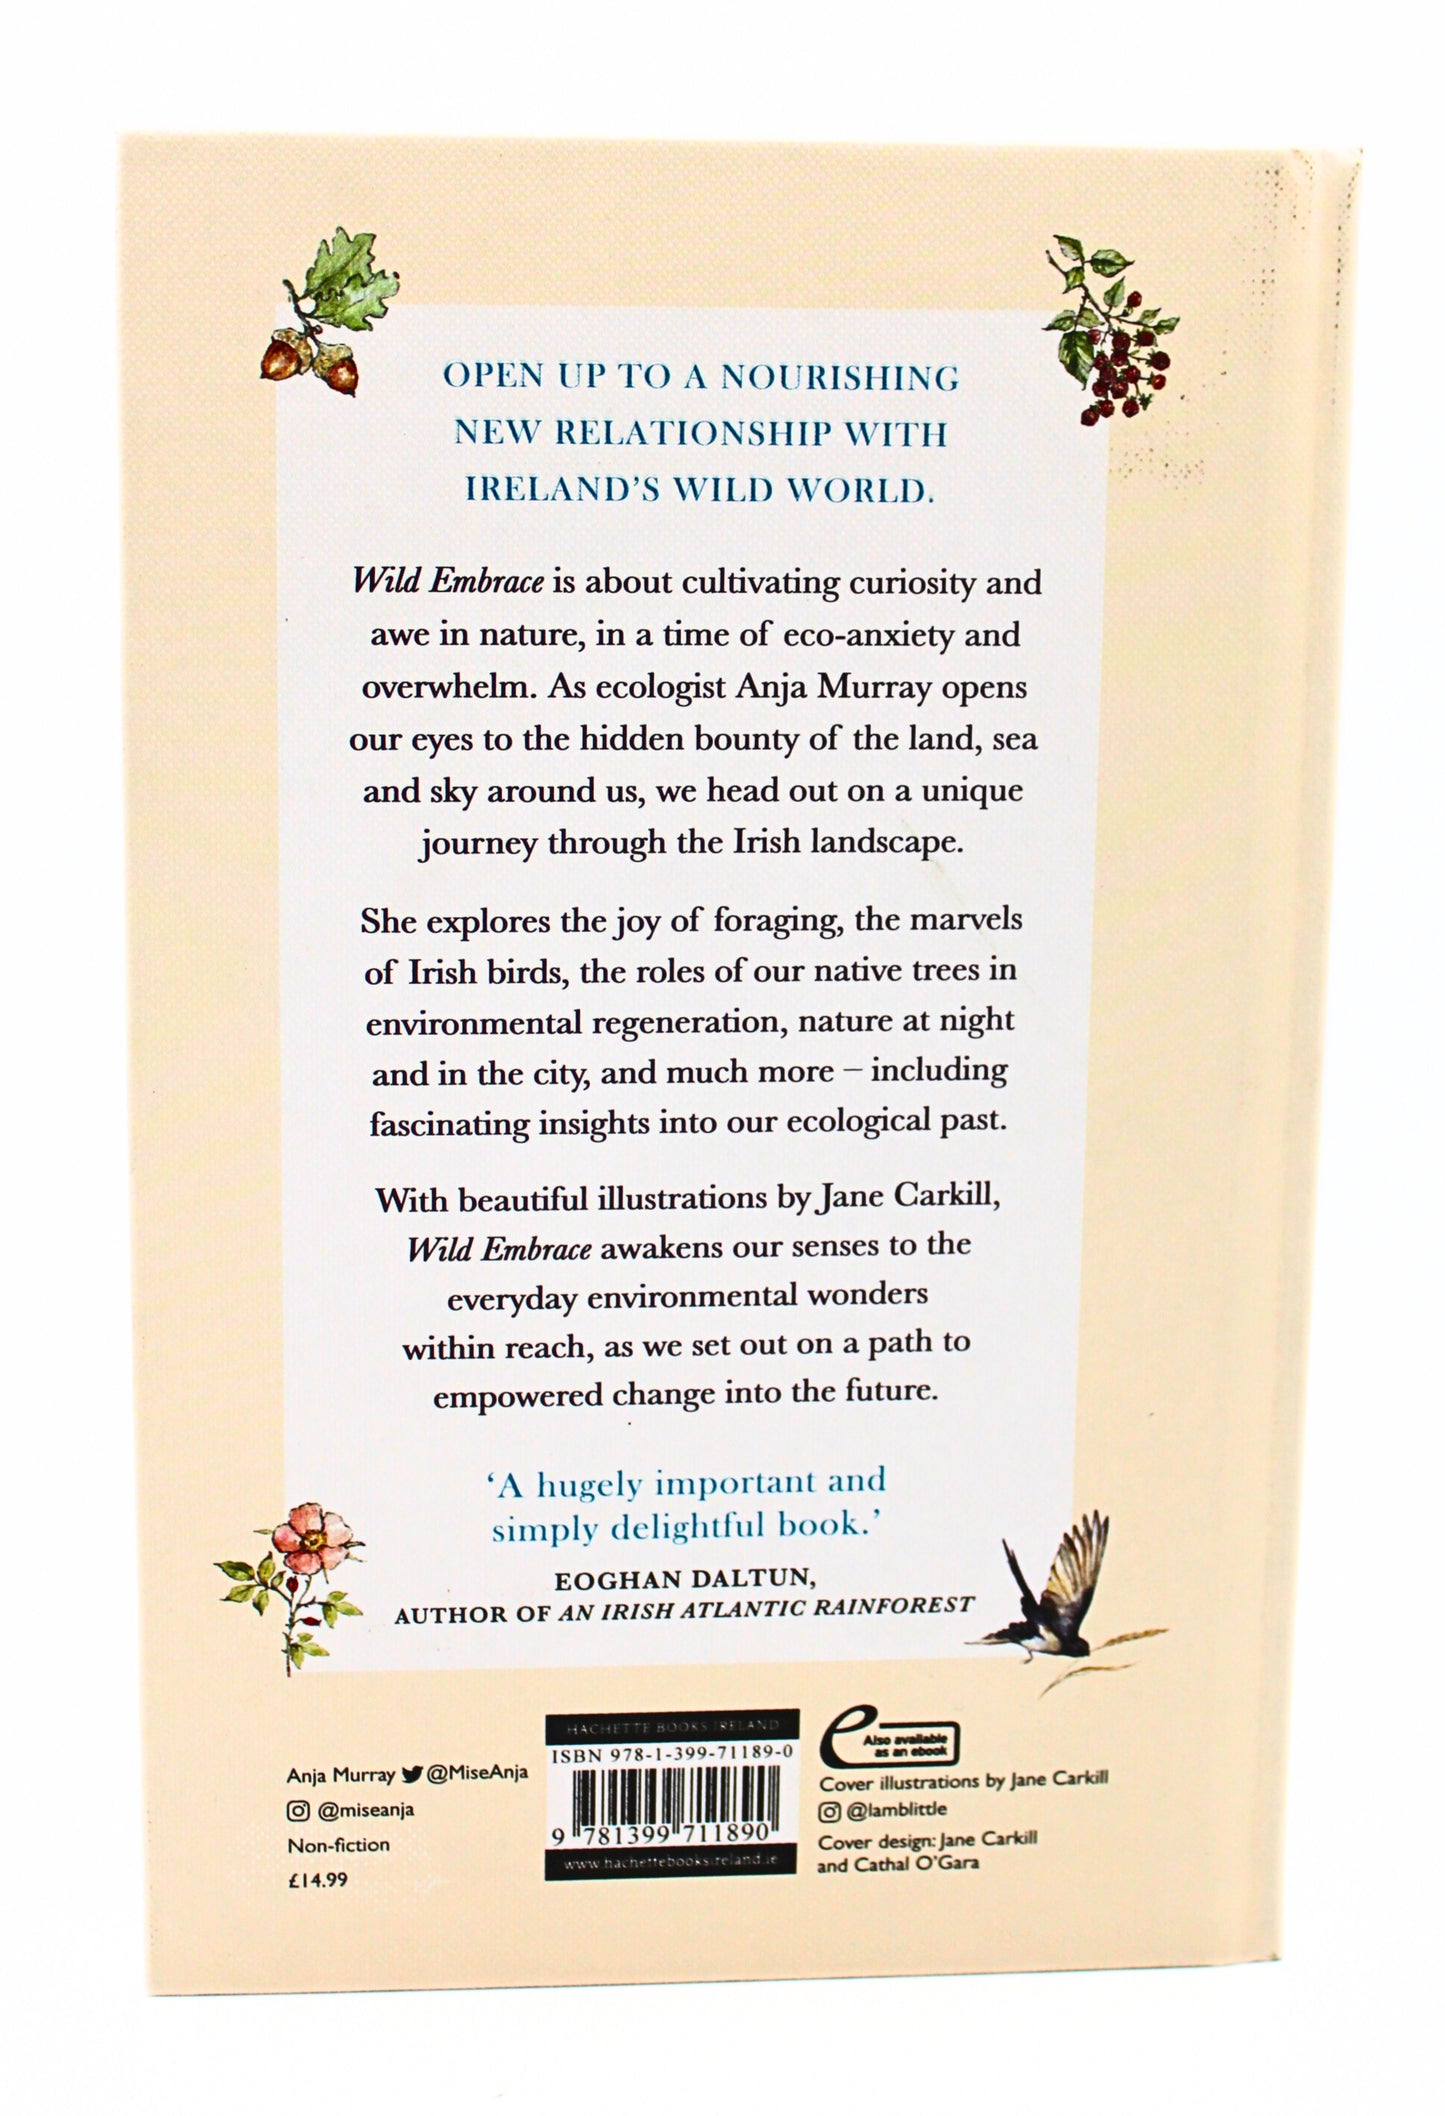 Back Cover of Wild Embrace: Connecting to the Wonder of Ireland's Natural World by Anja Murray